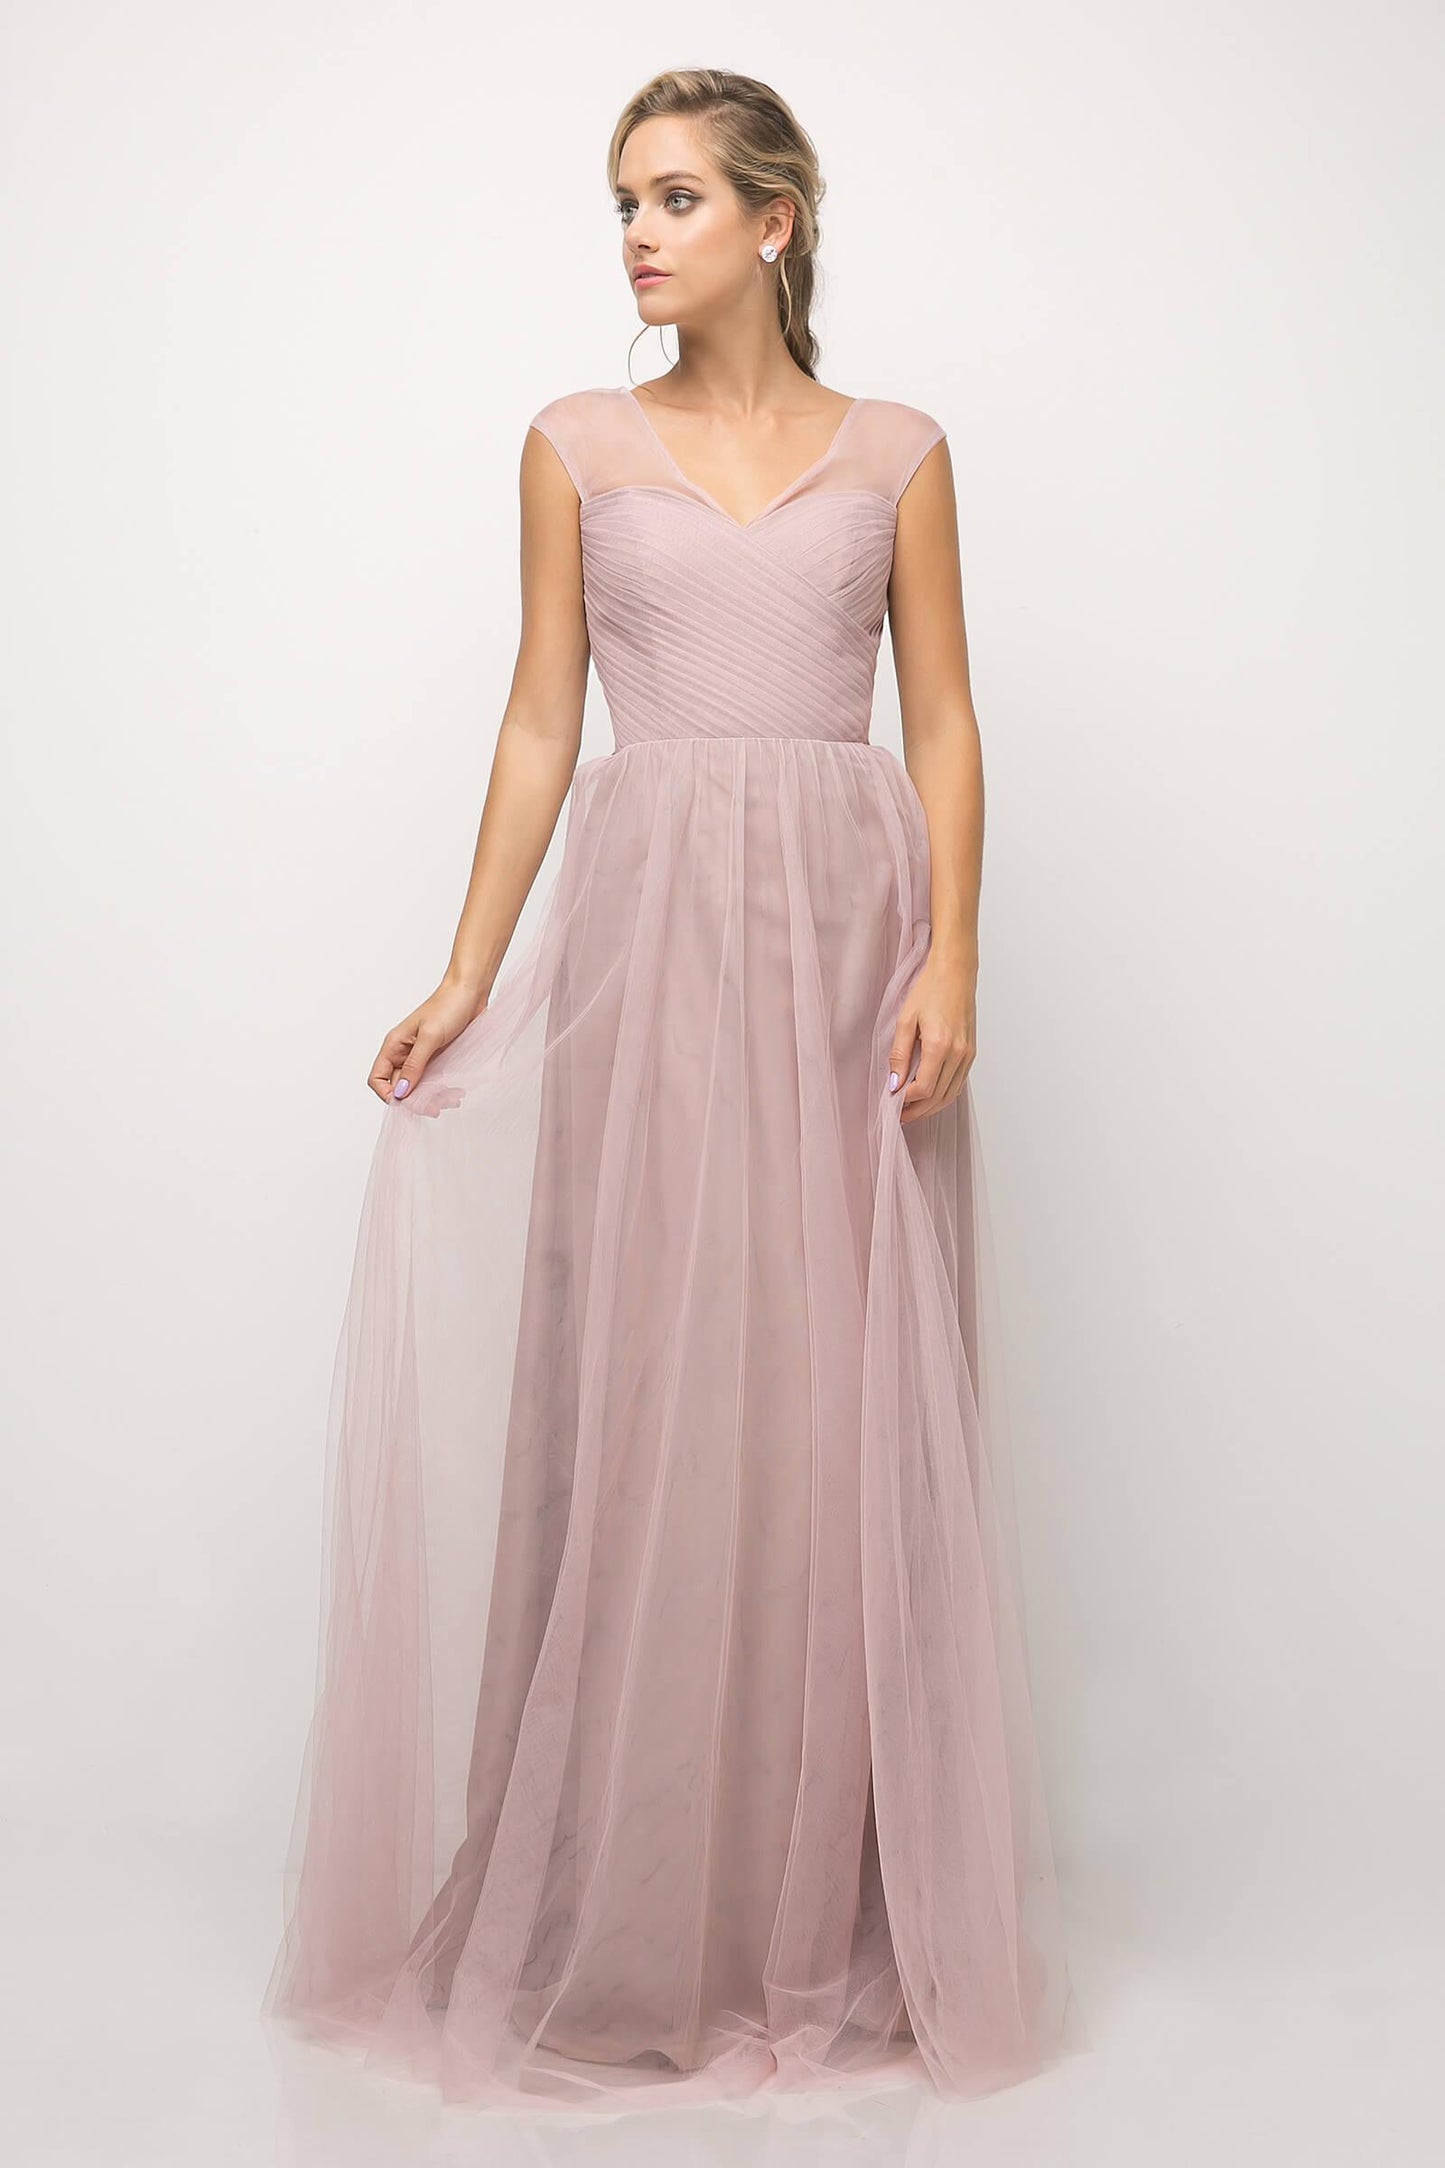 Long Plus Size Formal Dress Bridesmaid Gown Dusty Rose